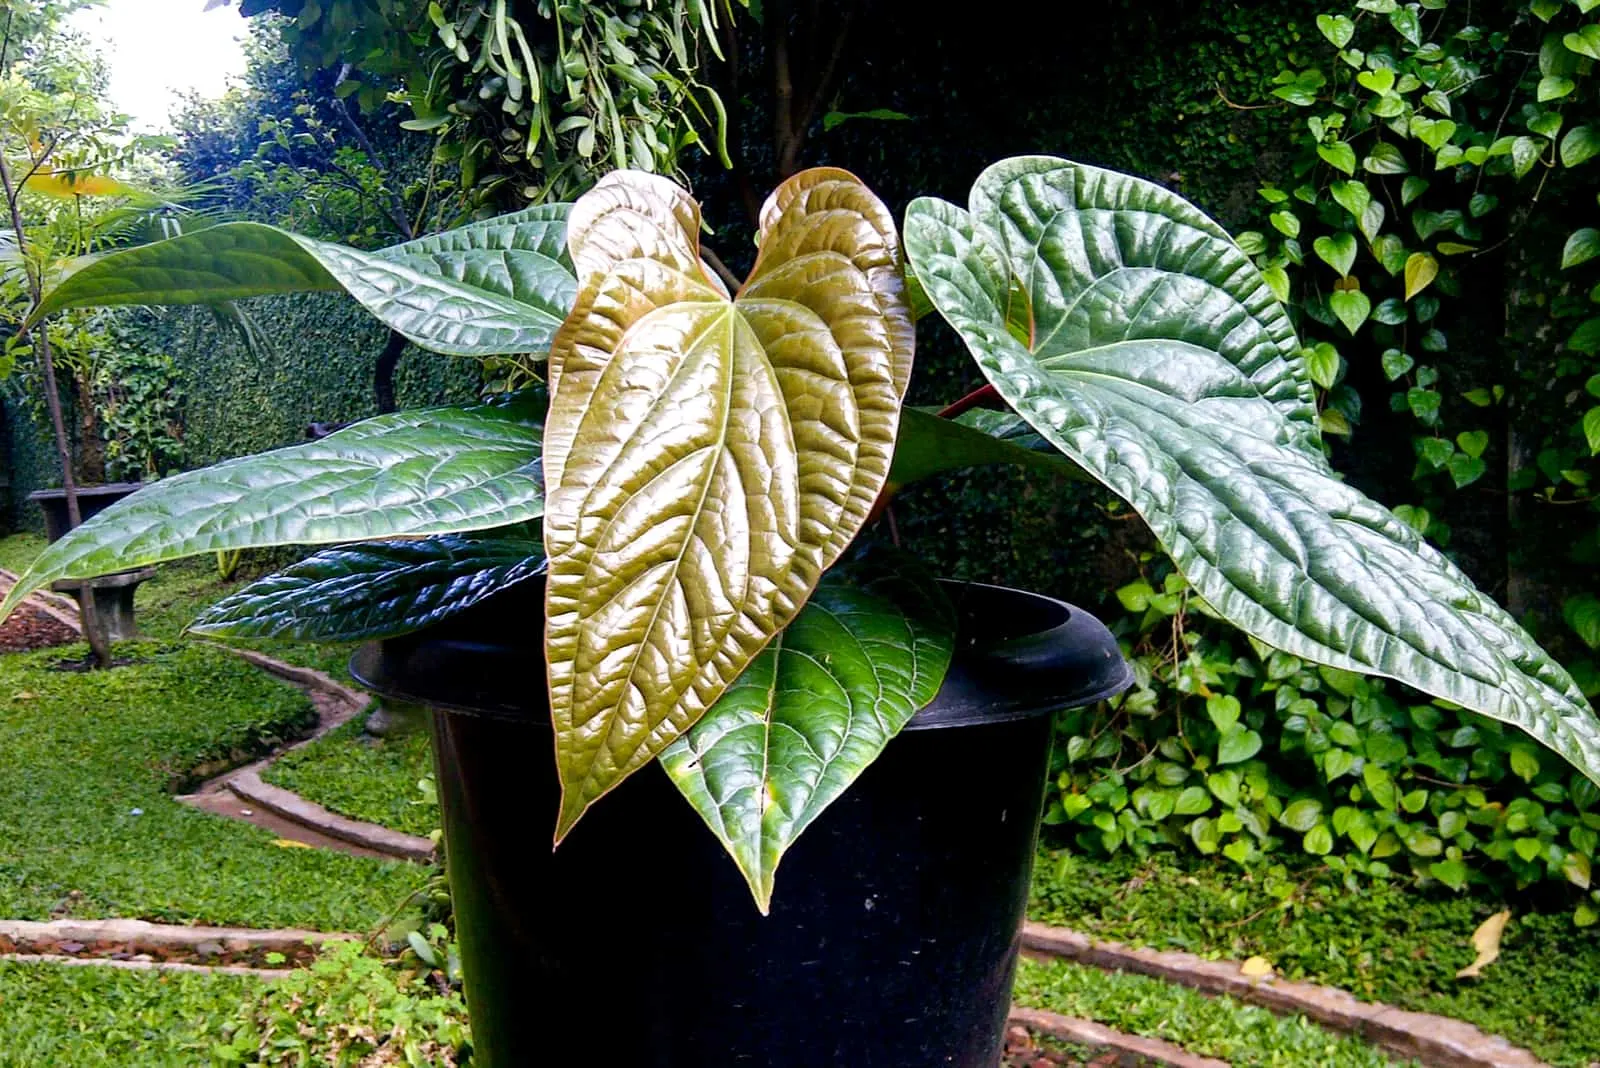 Anthurium Radicans with yellow leaf